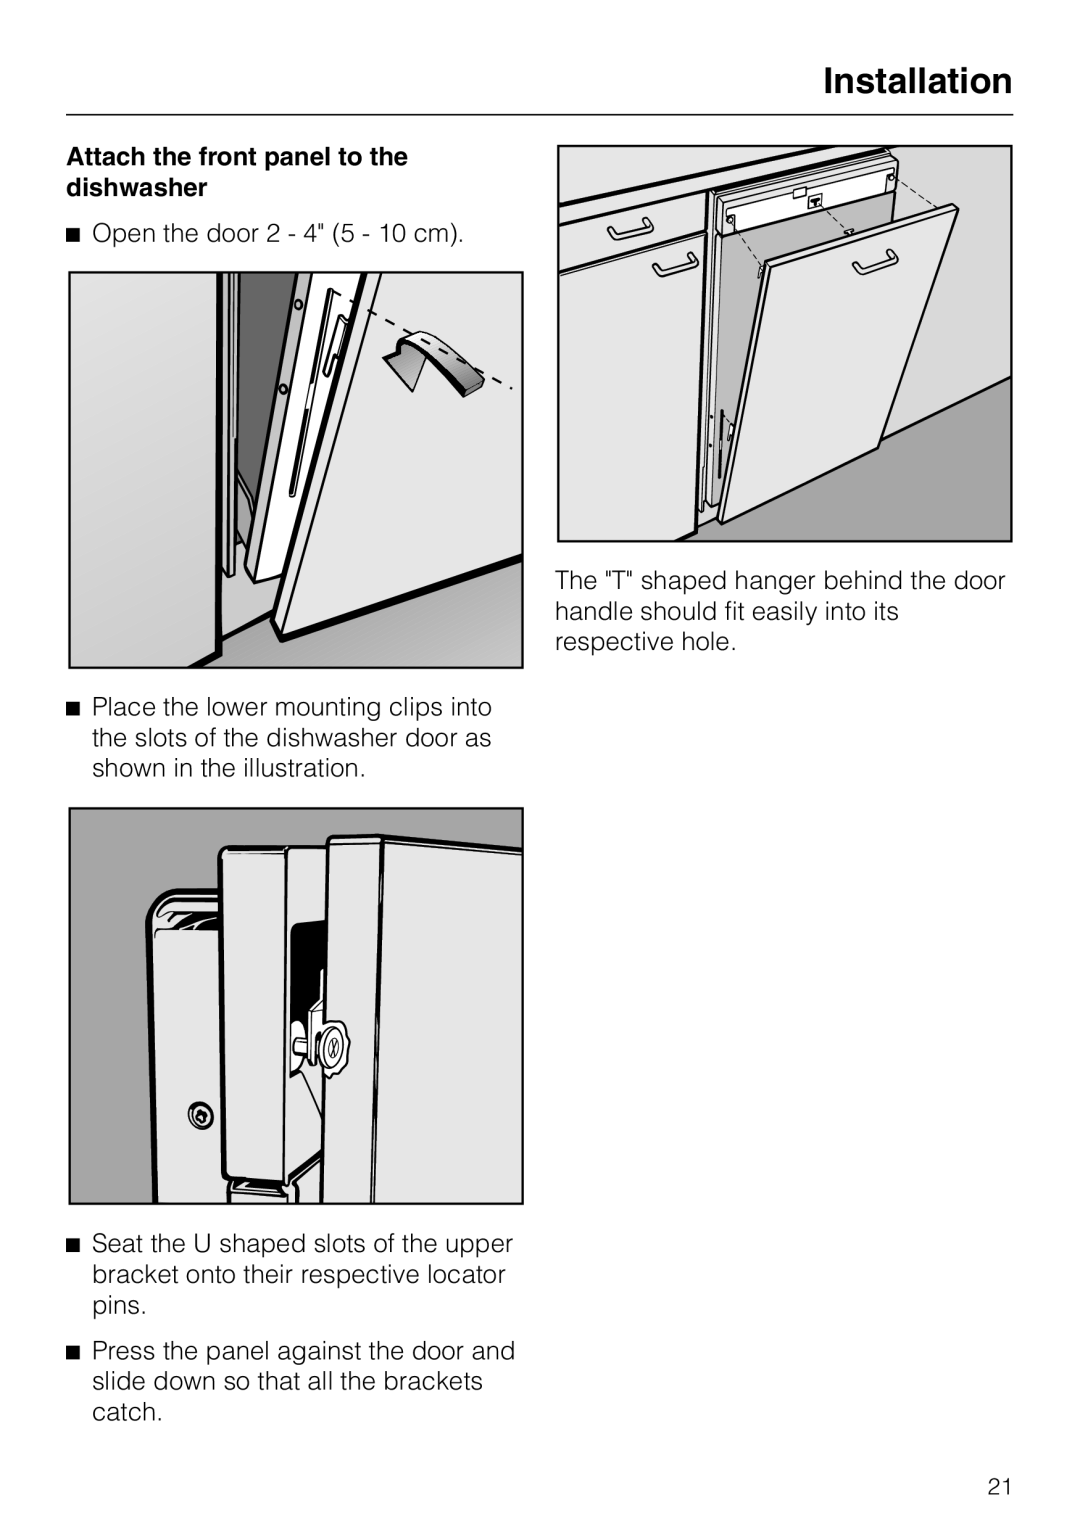 Miele HG01 installation instructions Attach the front panel to the dishwasher, Installation 